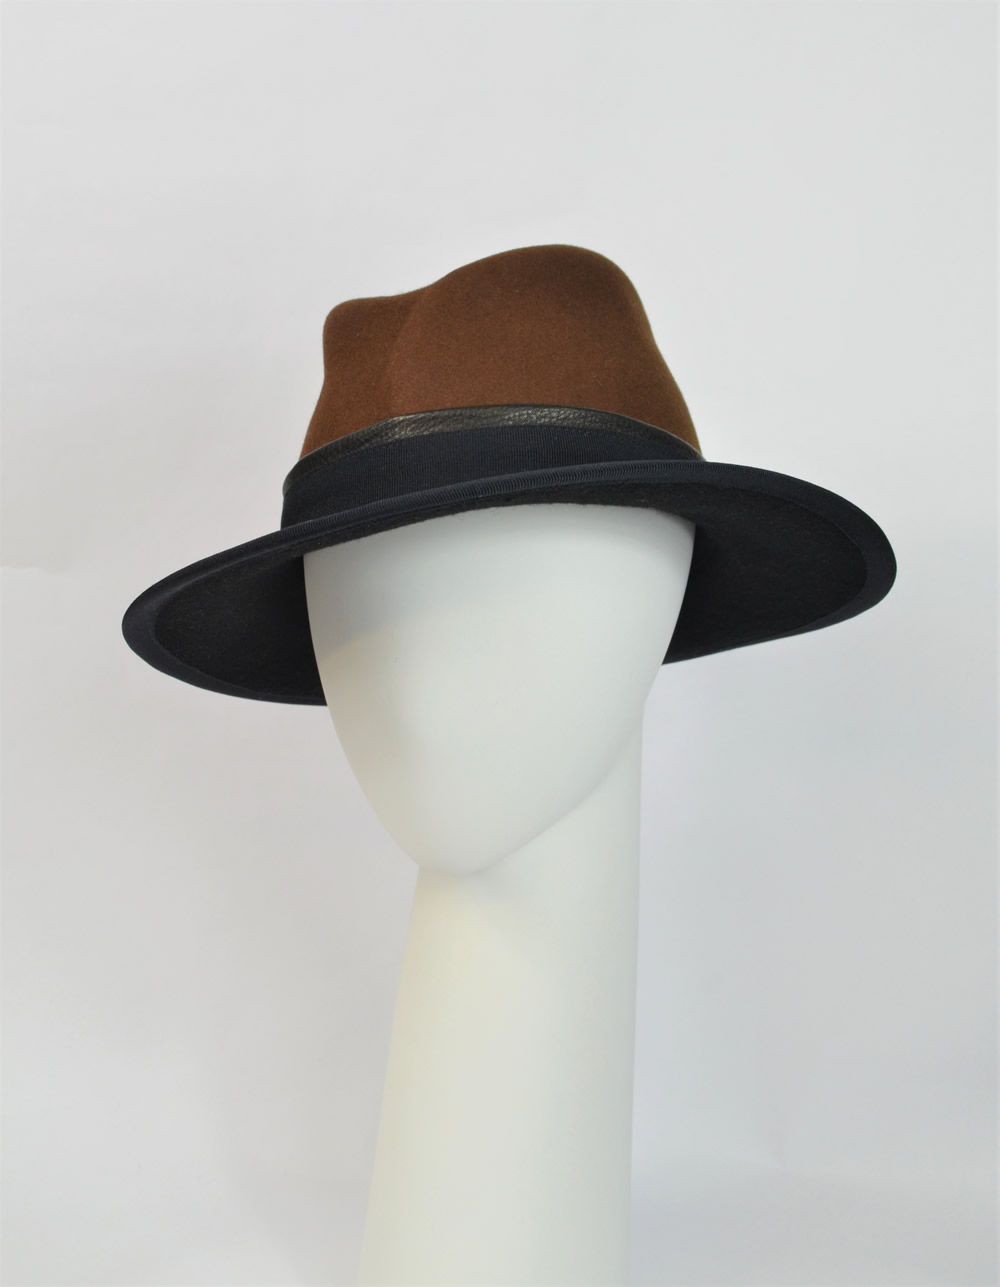 Shop handmade hats and caps online - Laurence Leleux